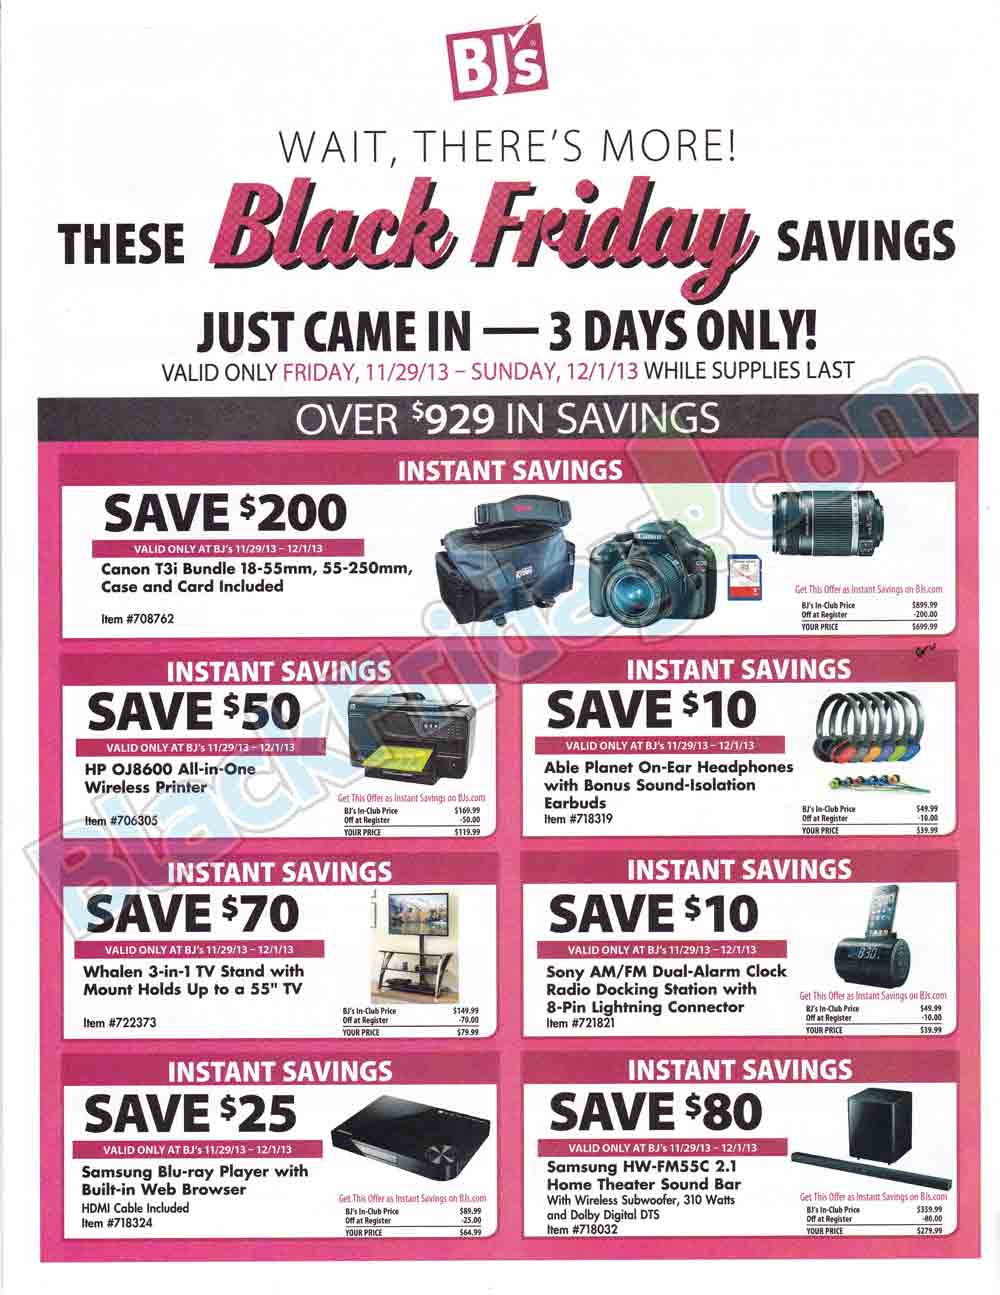 BJ's Black Friday 2013 Ad - Find the Best BJ's Black Friday Deals and - What Stores Haven't Leaked Their Black Friday Ad Yet